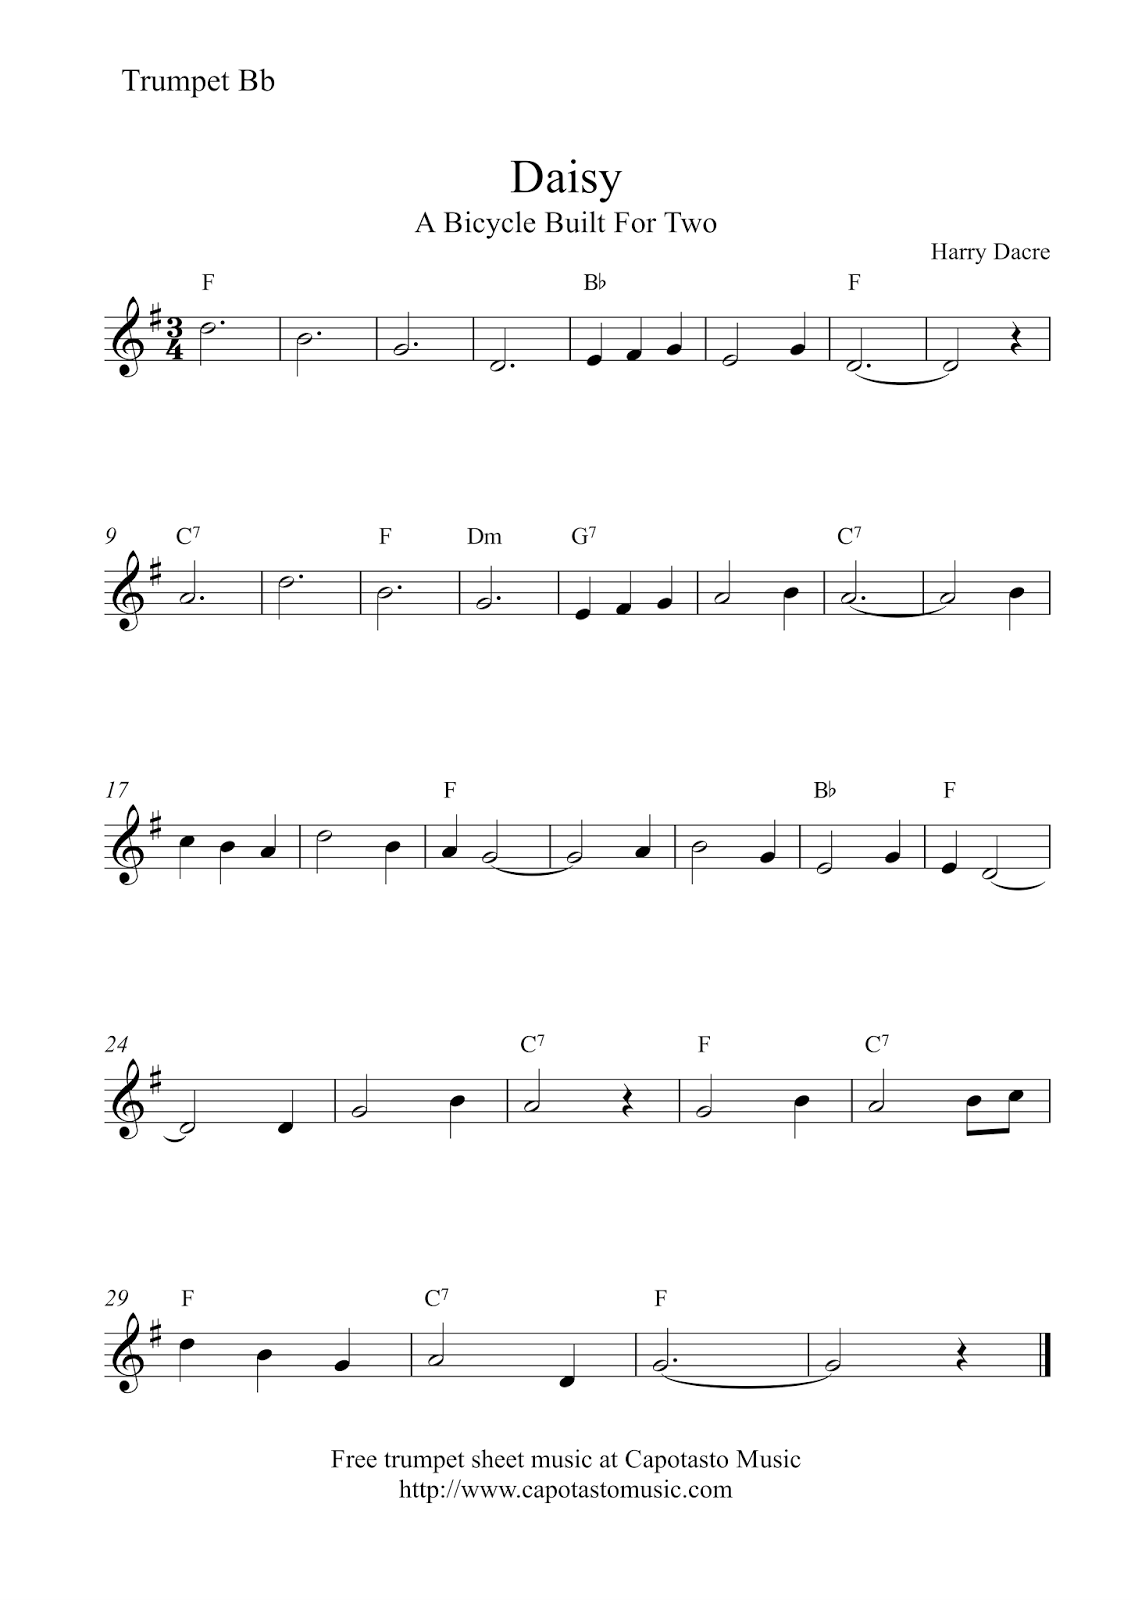 Free Printable Sheet Music Trumpet Sheet Music For Beginners A Bicycle Built For Two Daisy